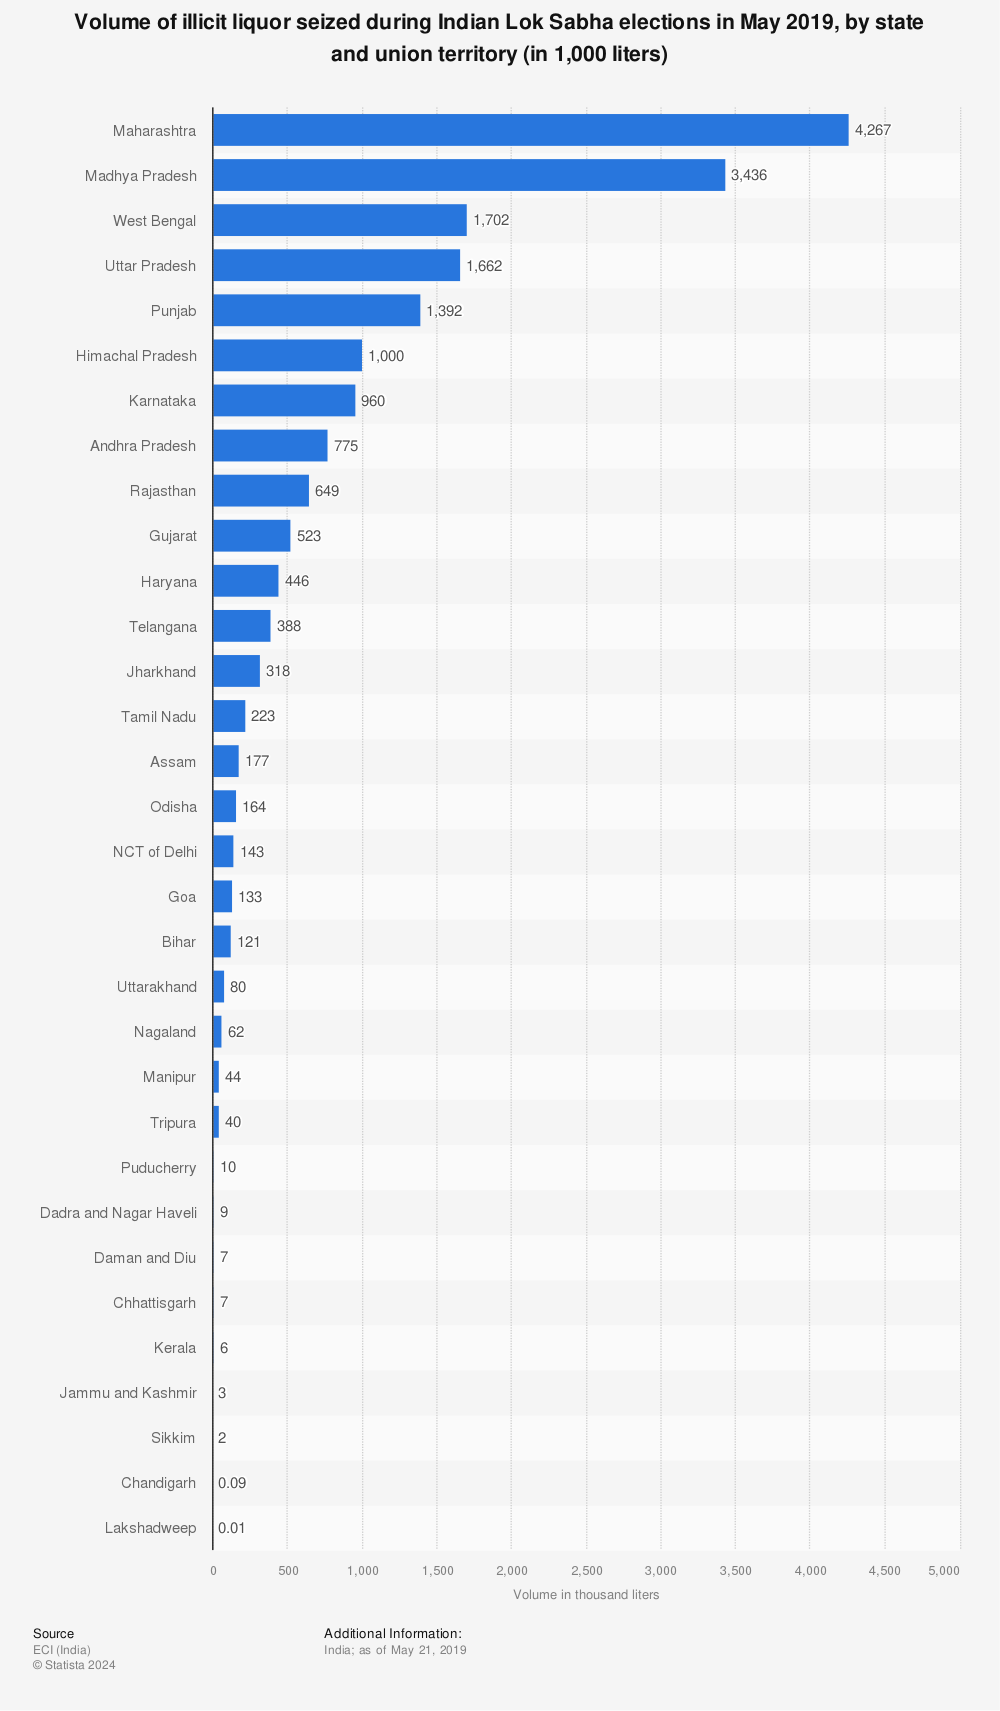 Statistic: Volume of illicit liquor seized during Indian Lok Sabha elections in May 2019, by state and union territory (in 1,000 liters) | Statista